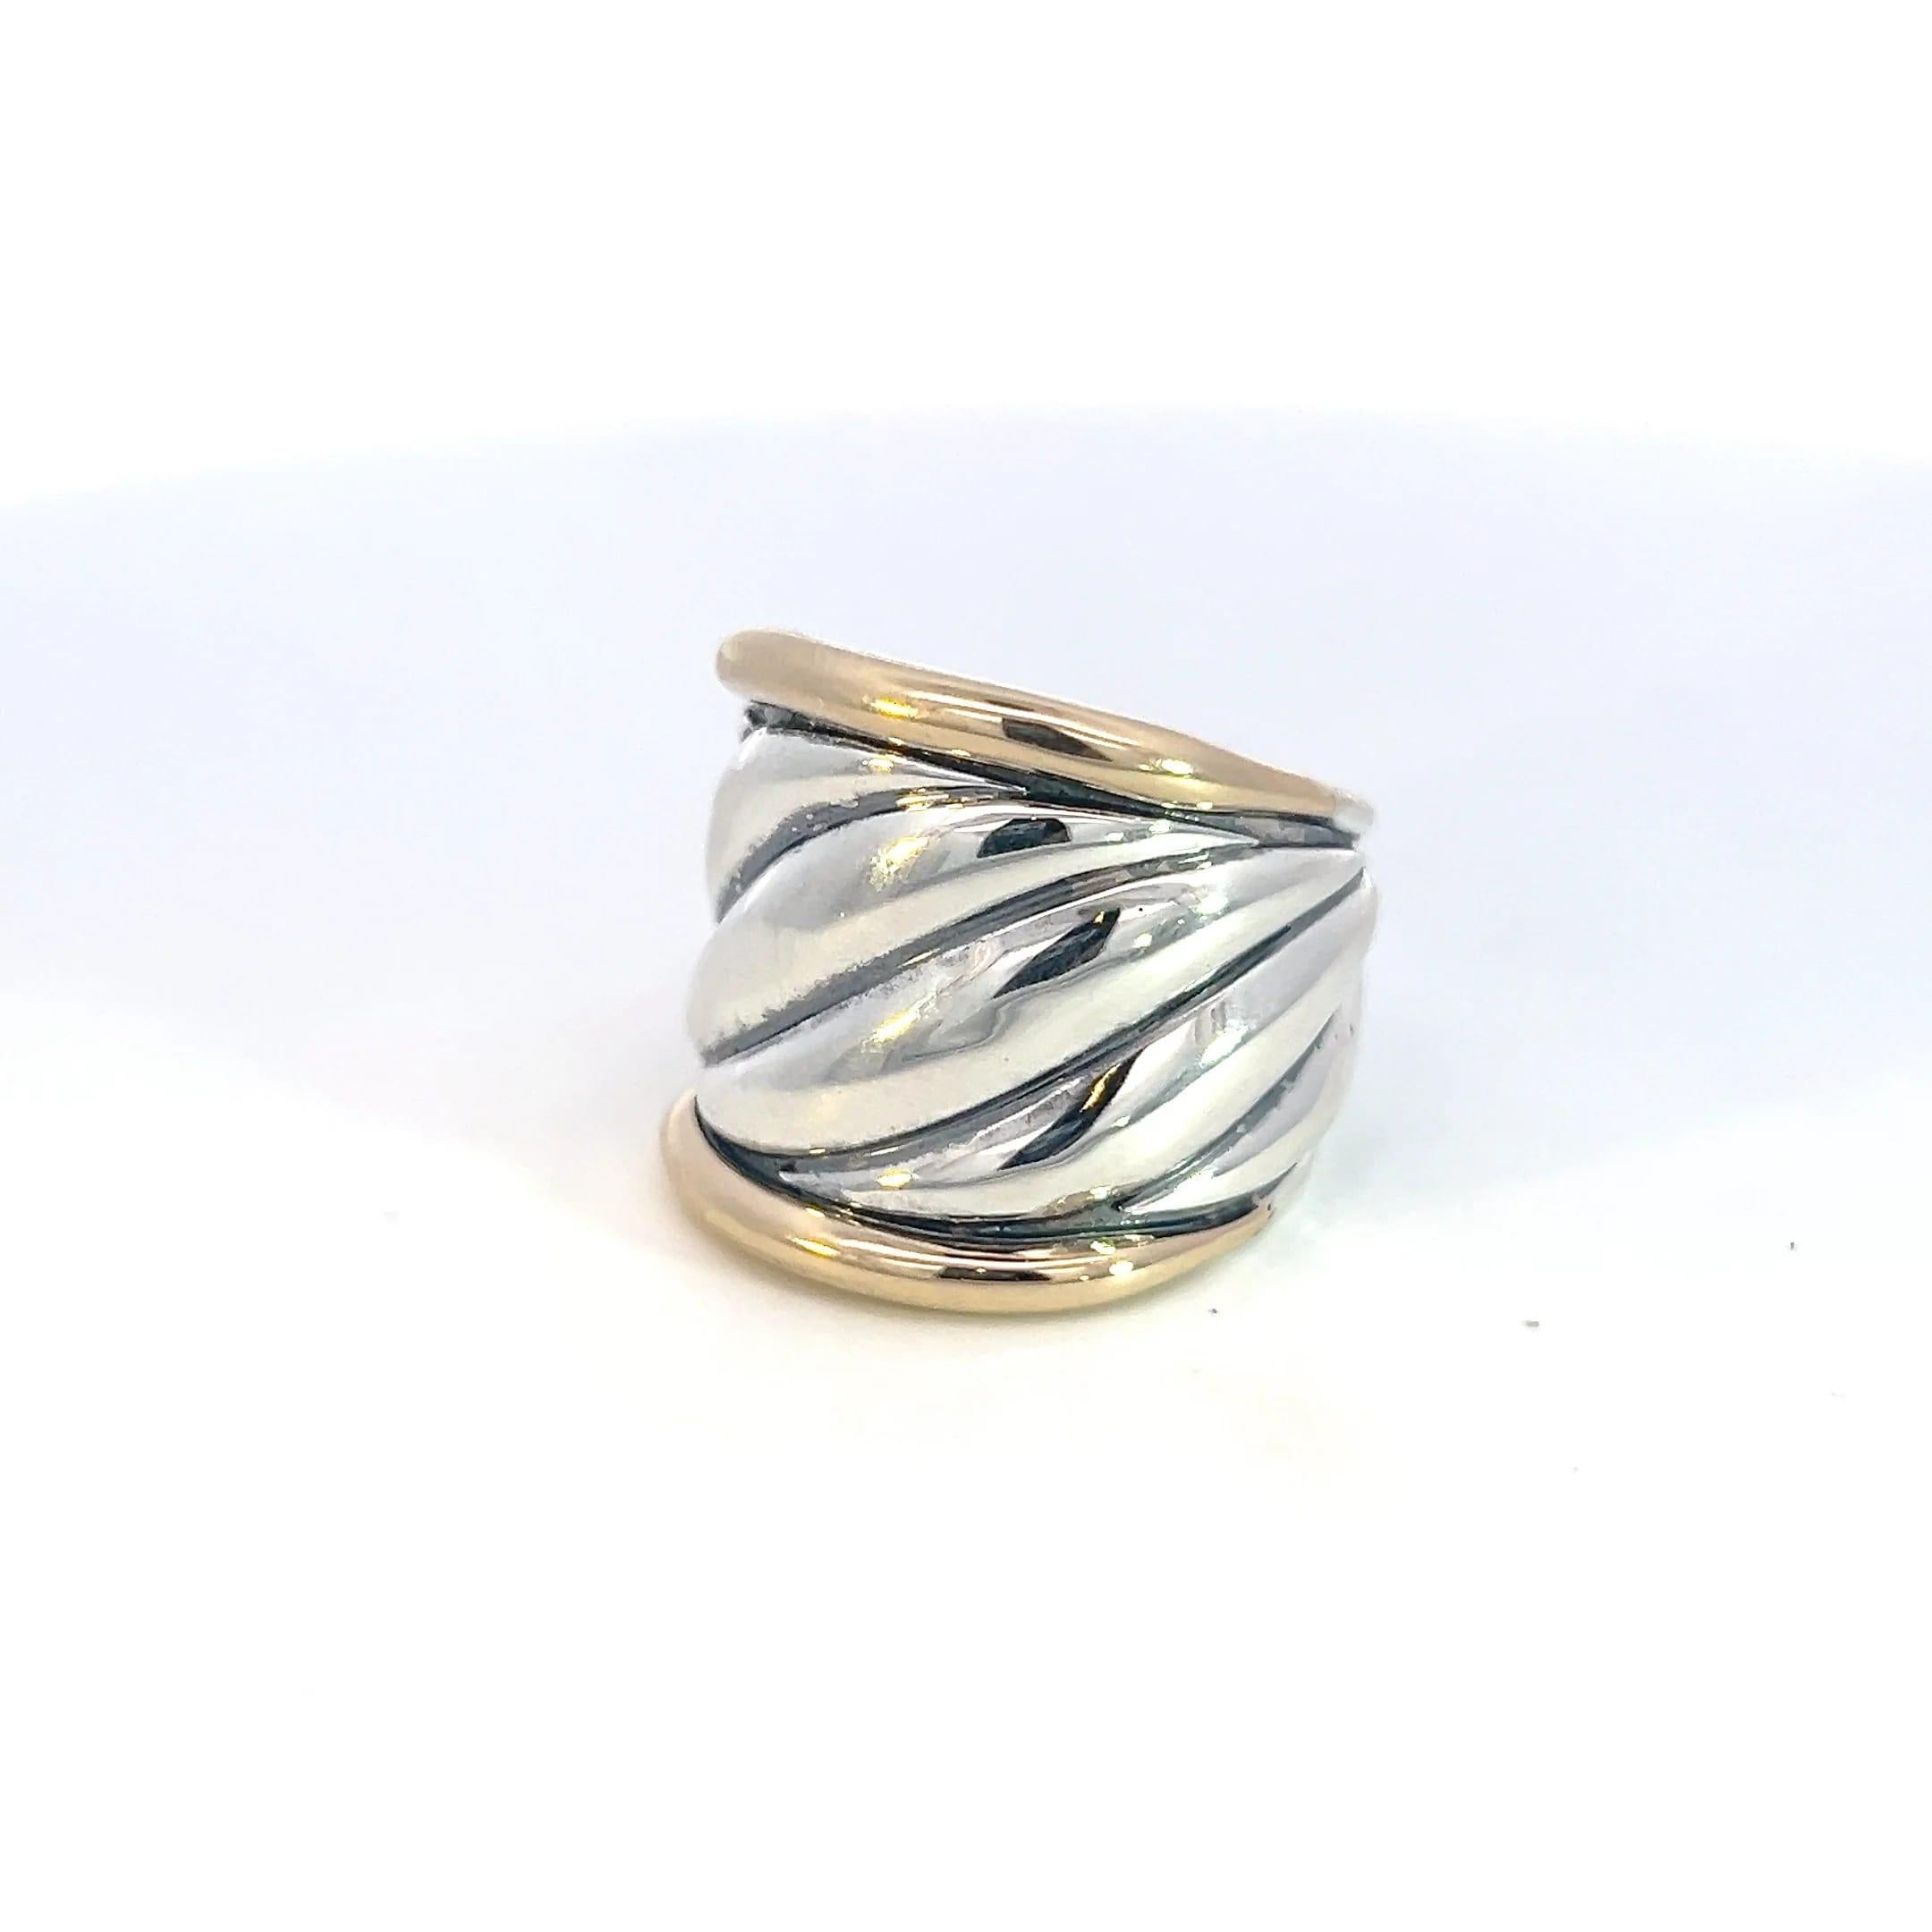 Authentic David Yurman Estate Saddle Ring 7.5 18K Silver 21 mm DY339

This elegant Authentic David Yurman ring is made of sterling silver & 18k gold.

TRUSTED SELLER SINCE 2002

PLEASE SEE OUR HUNDREDS OF POSITIVE FEEDBACKS FROM OUR CLIENTS!!

FREE